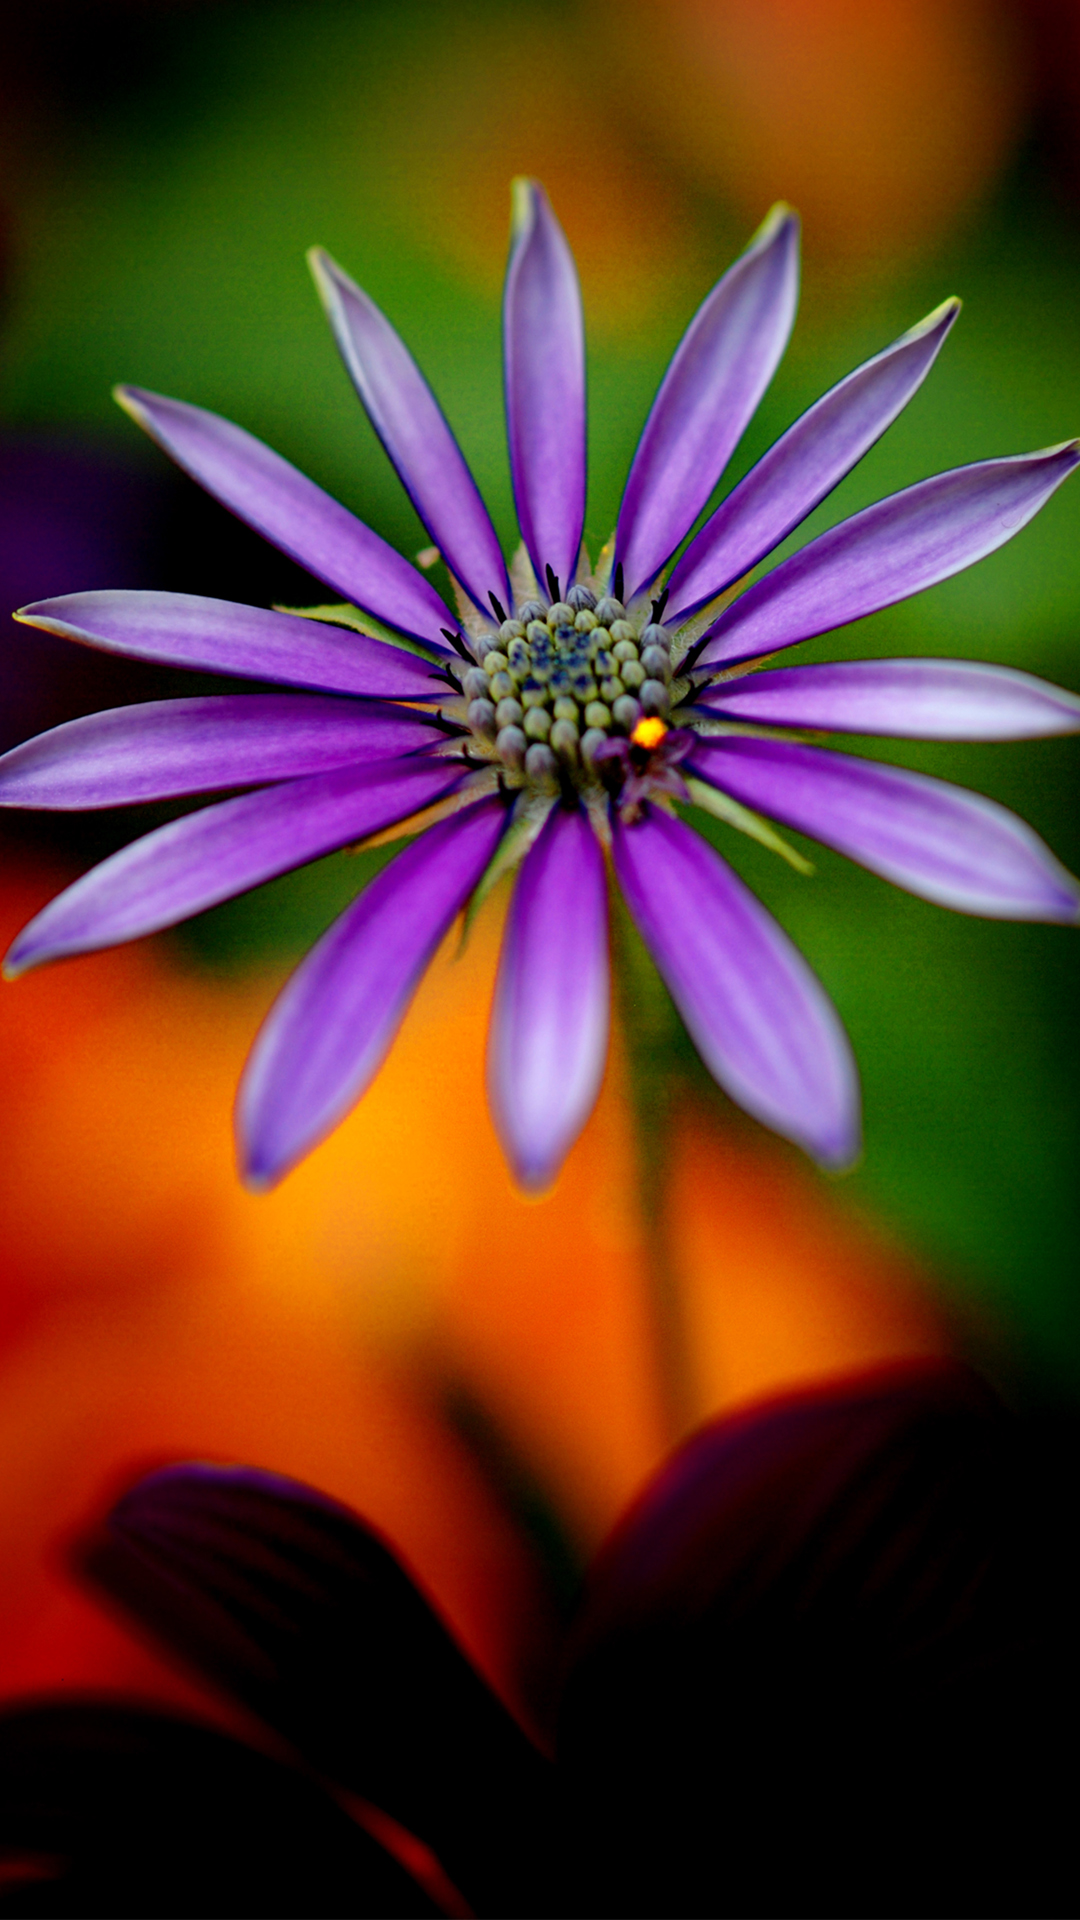 Full HD Wallpapers 1080p for Mobile with Purple Flower ...